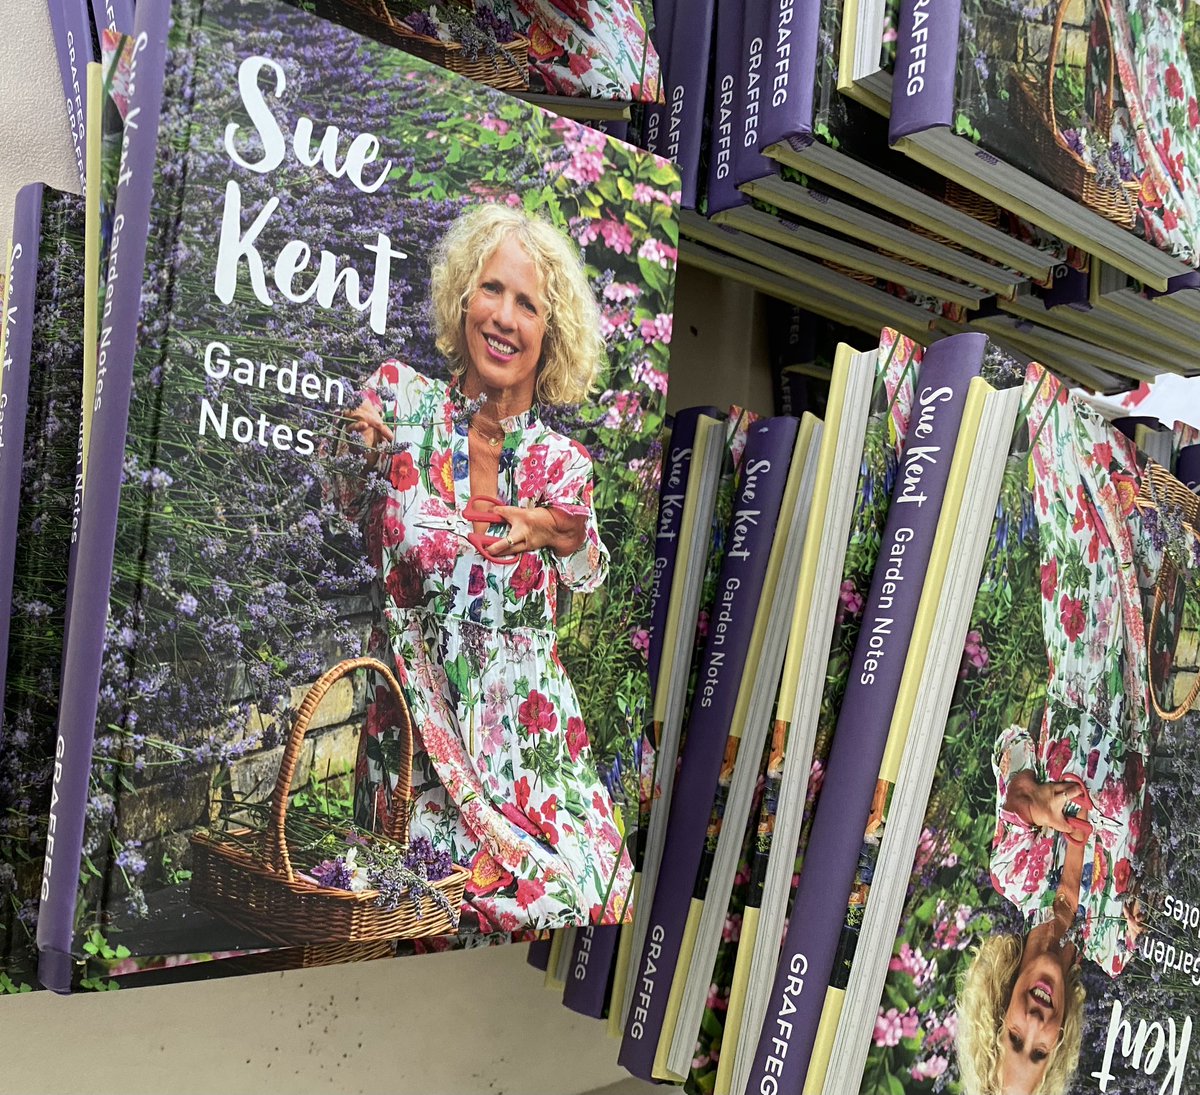 I’m busy signing copies of my book, Sue Kent Garden Notes in preparation for this weekend as I’m appearing at @tobygardenfest on Friday and @BBCGWLive on Saturday talking gardening #Gardenshow